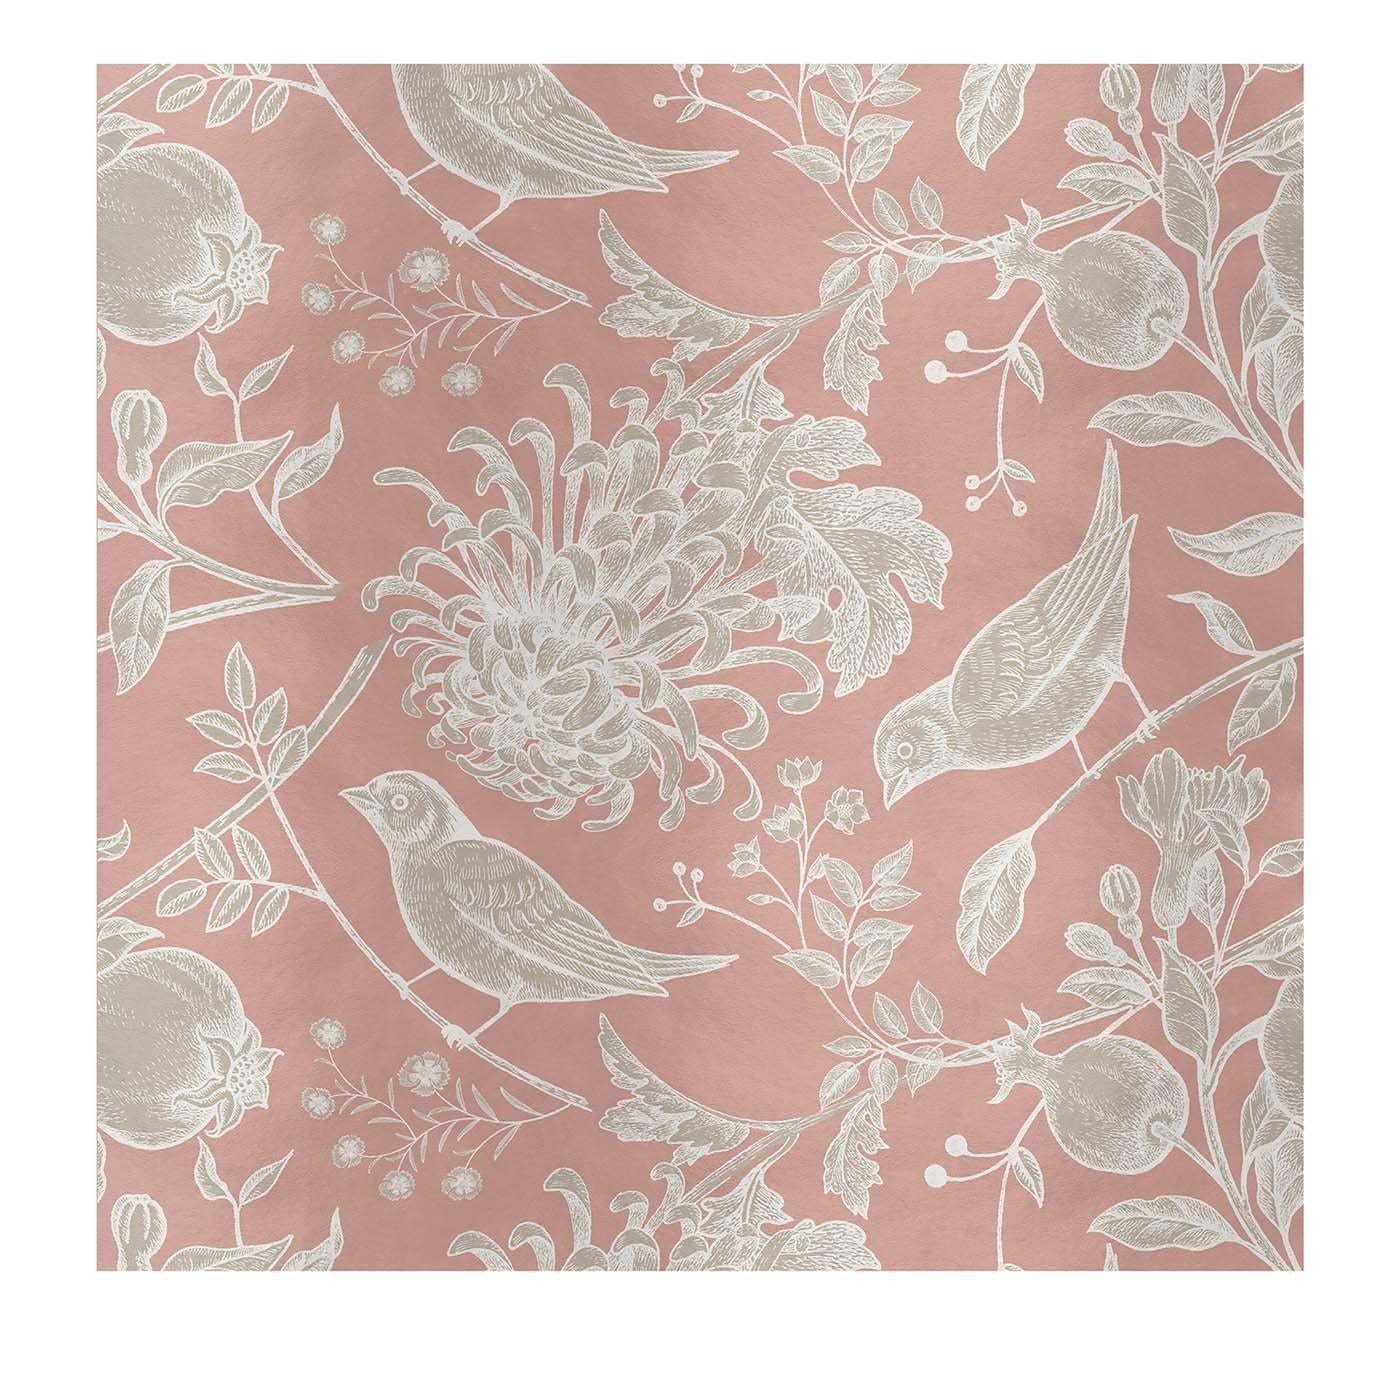 Modern Flowers And Birds Pink Panel #1